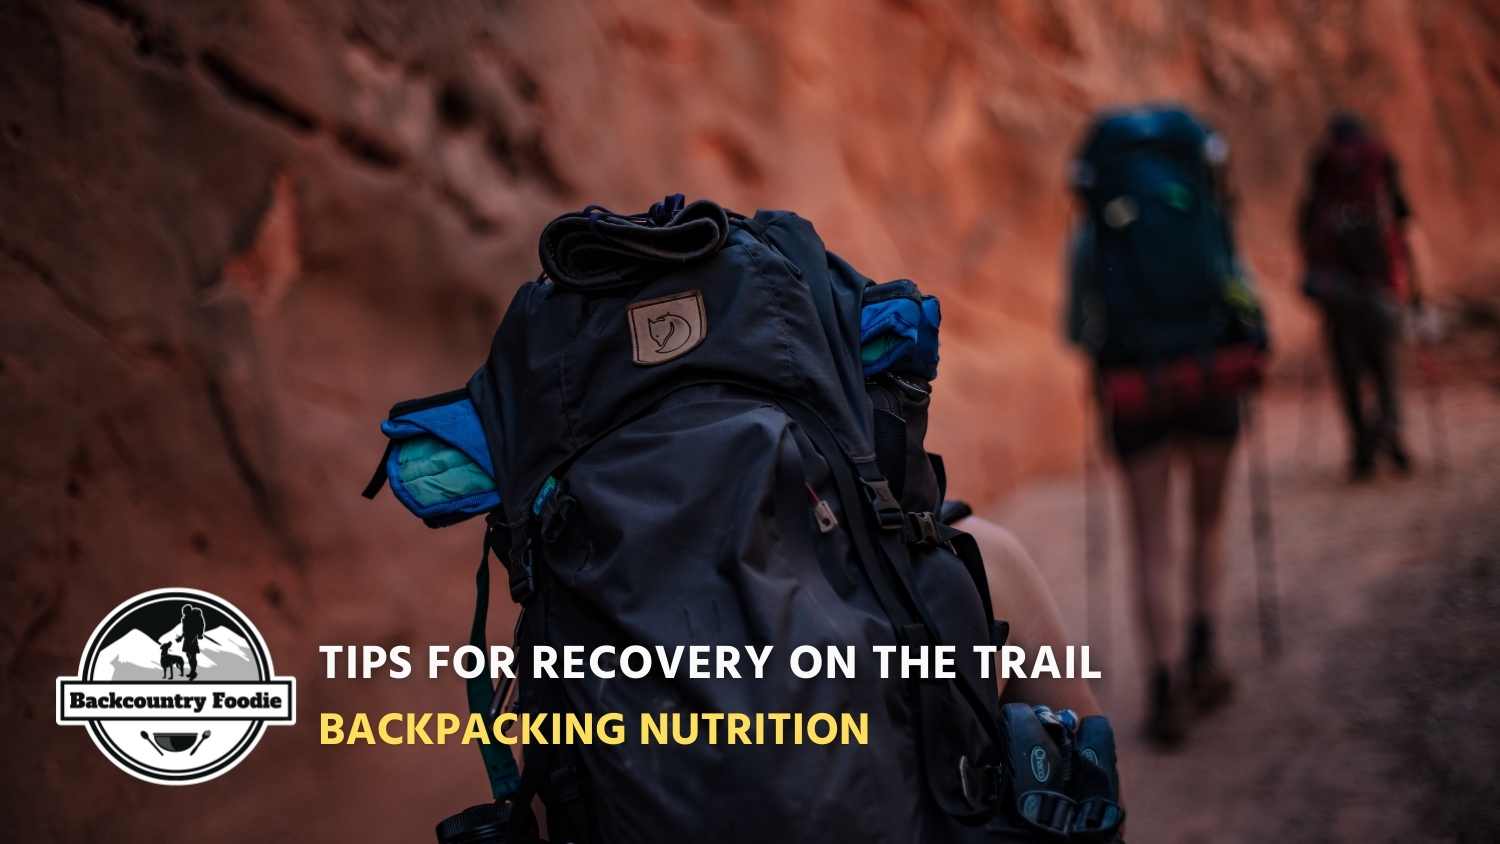 Backcountry Foodie Blog Nutrition Tips for Recovery on the Trail